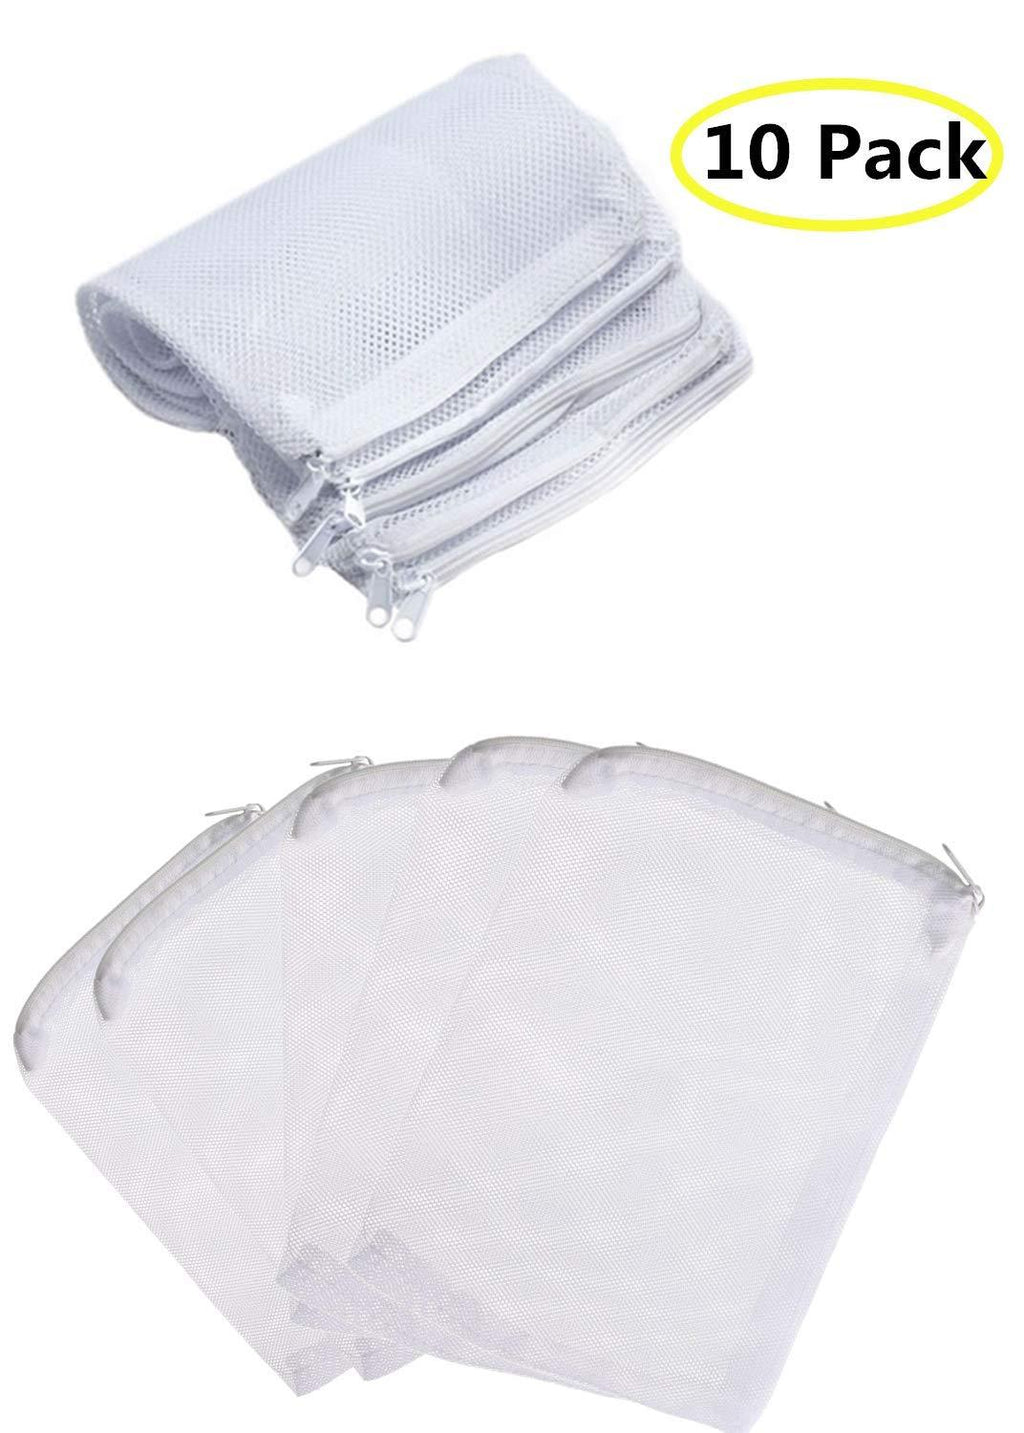 [Australia] - Aquarium Filter Bags Media Mesh Filter Bags with Zipper Reusable Nylon Zipper Bags for Fish Tank Activated Carbon,Charcoal,Bio Balls Filter Accessories, White (20 Pieces Upgraded Version Thickened) 10 Pack 